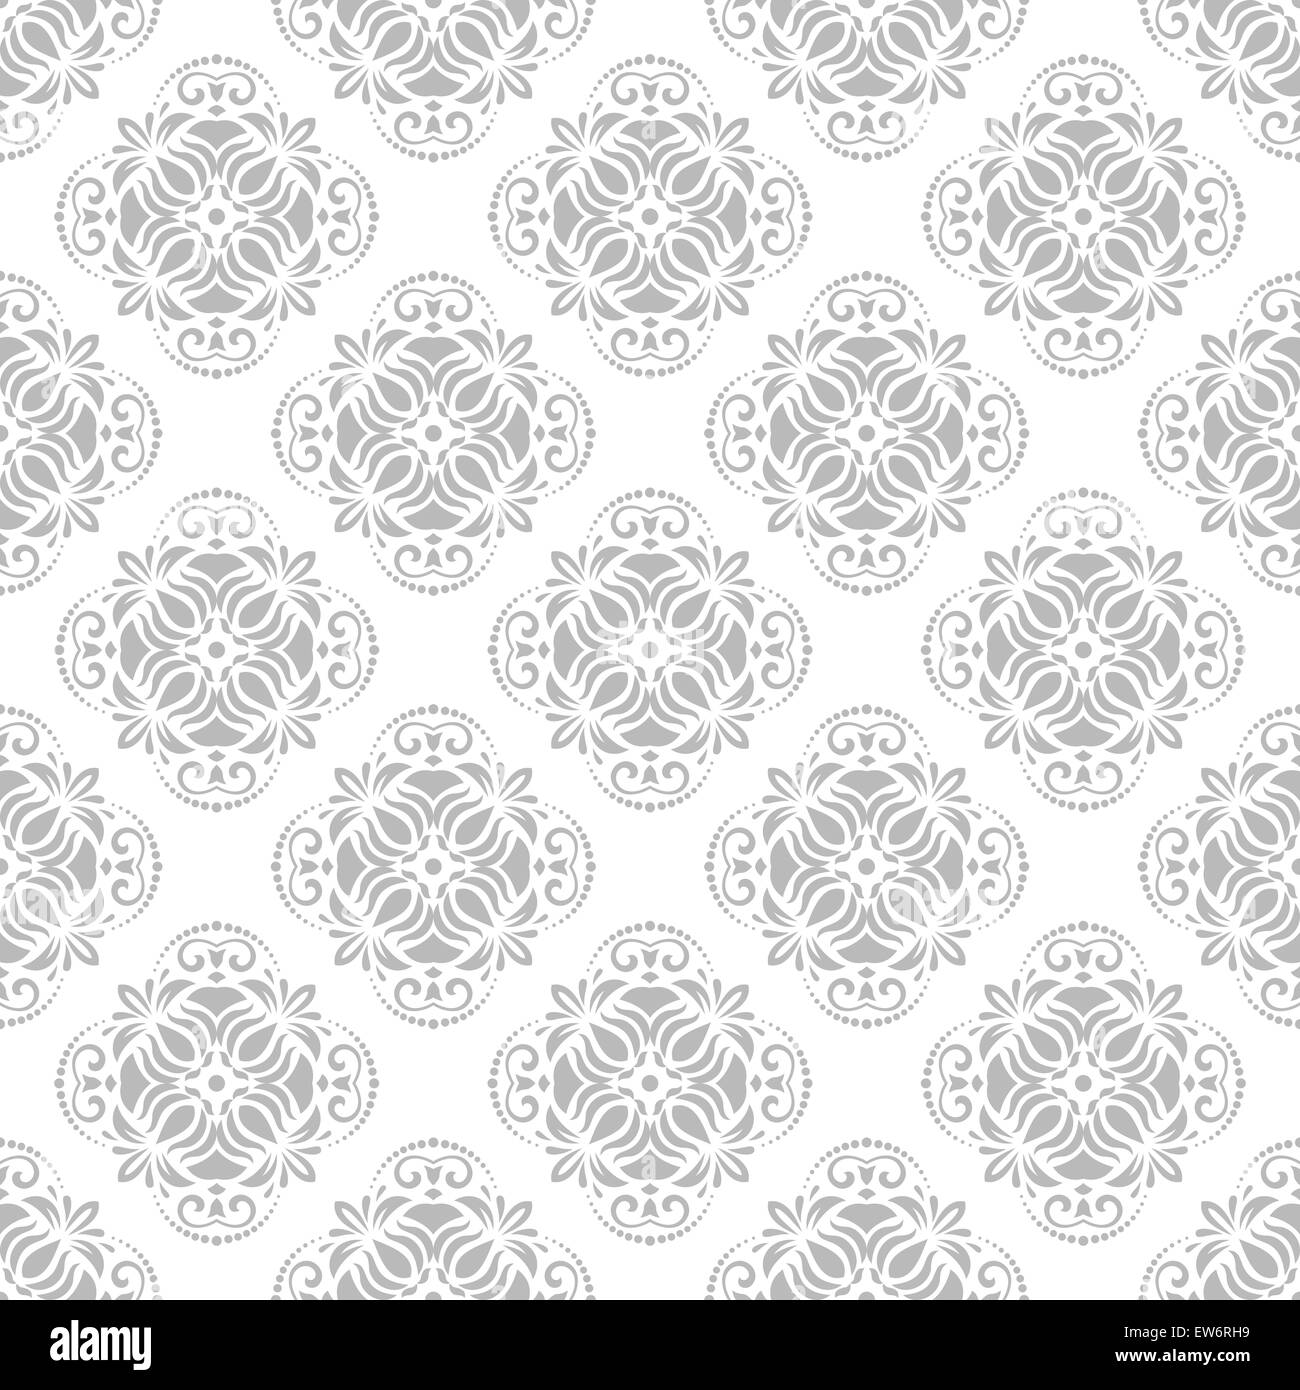 Floral Seamless  Pattern Stock Photo